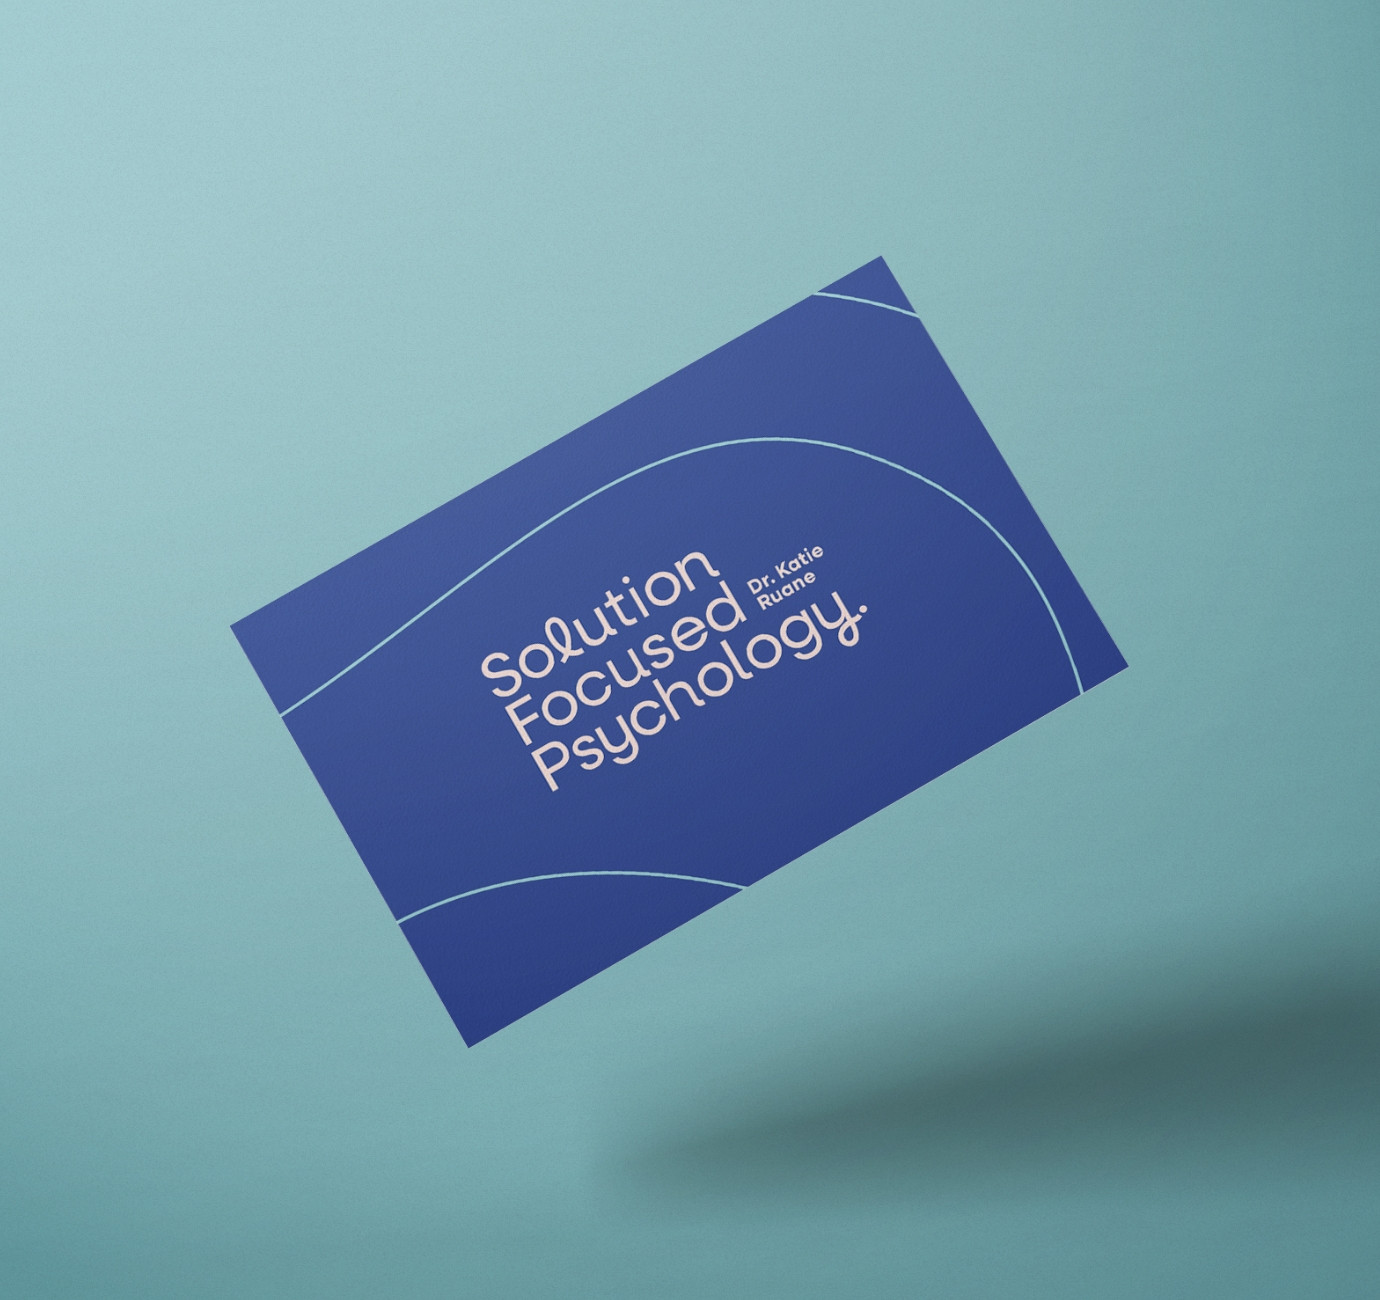 Solution Focused Psychology branding design by Root Studio Lincoln